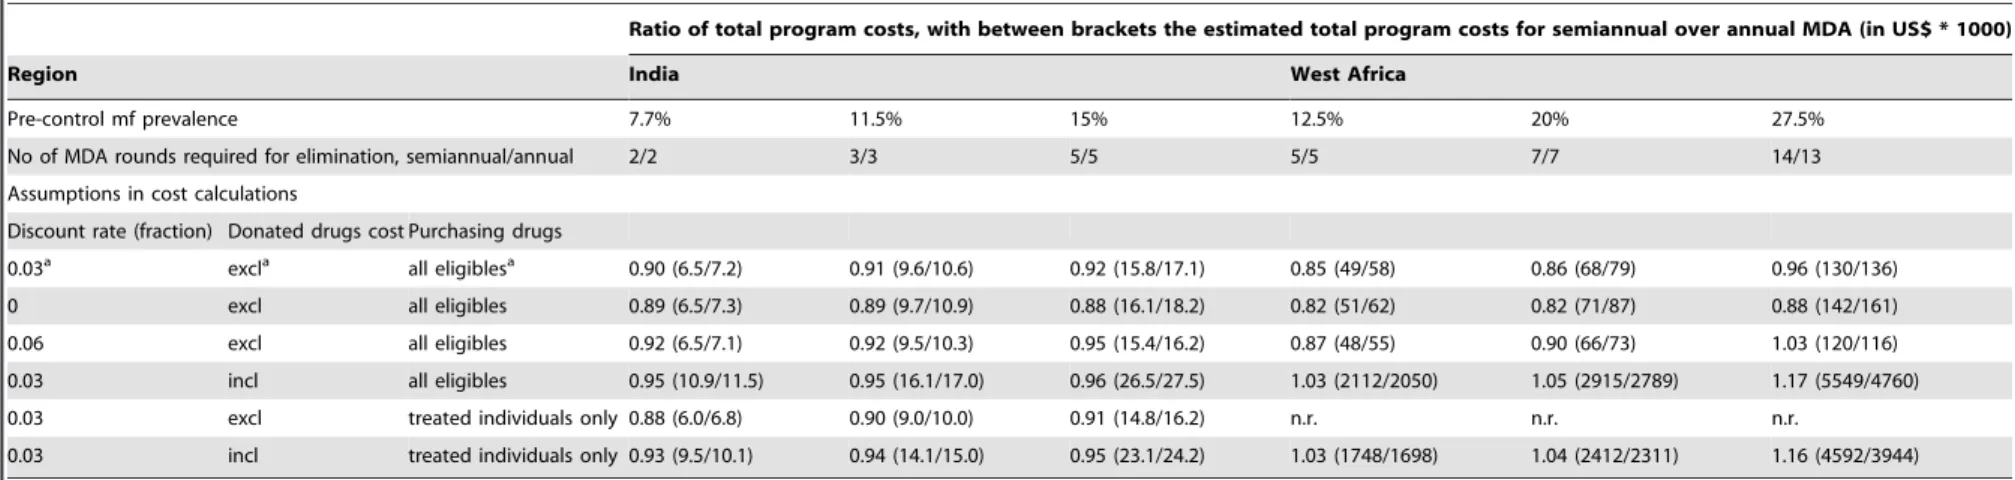 Table 6. Sensitivity analysis: impact of simulation assumptions on the relative cost of semiannual/annual mass drug administration (MDA).